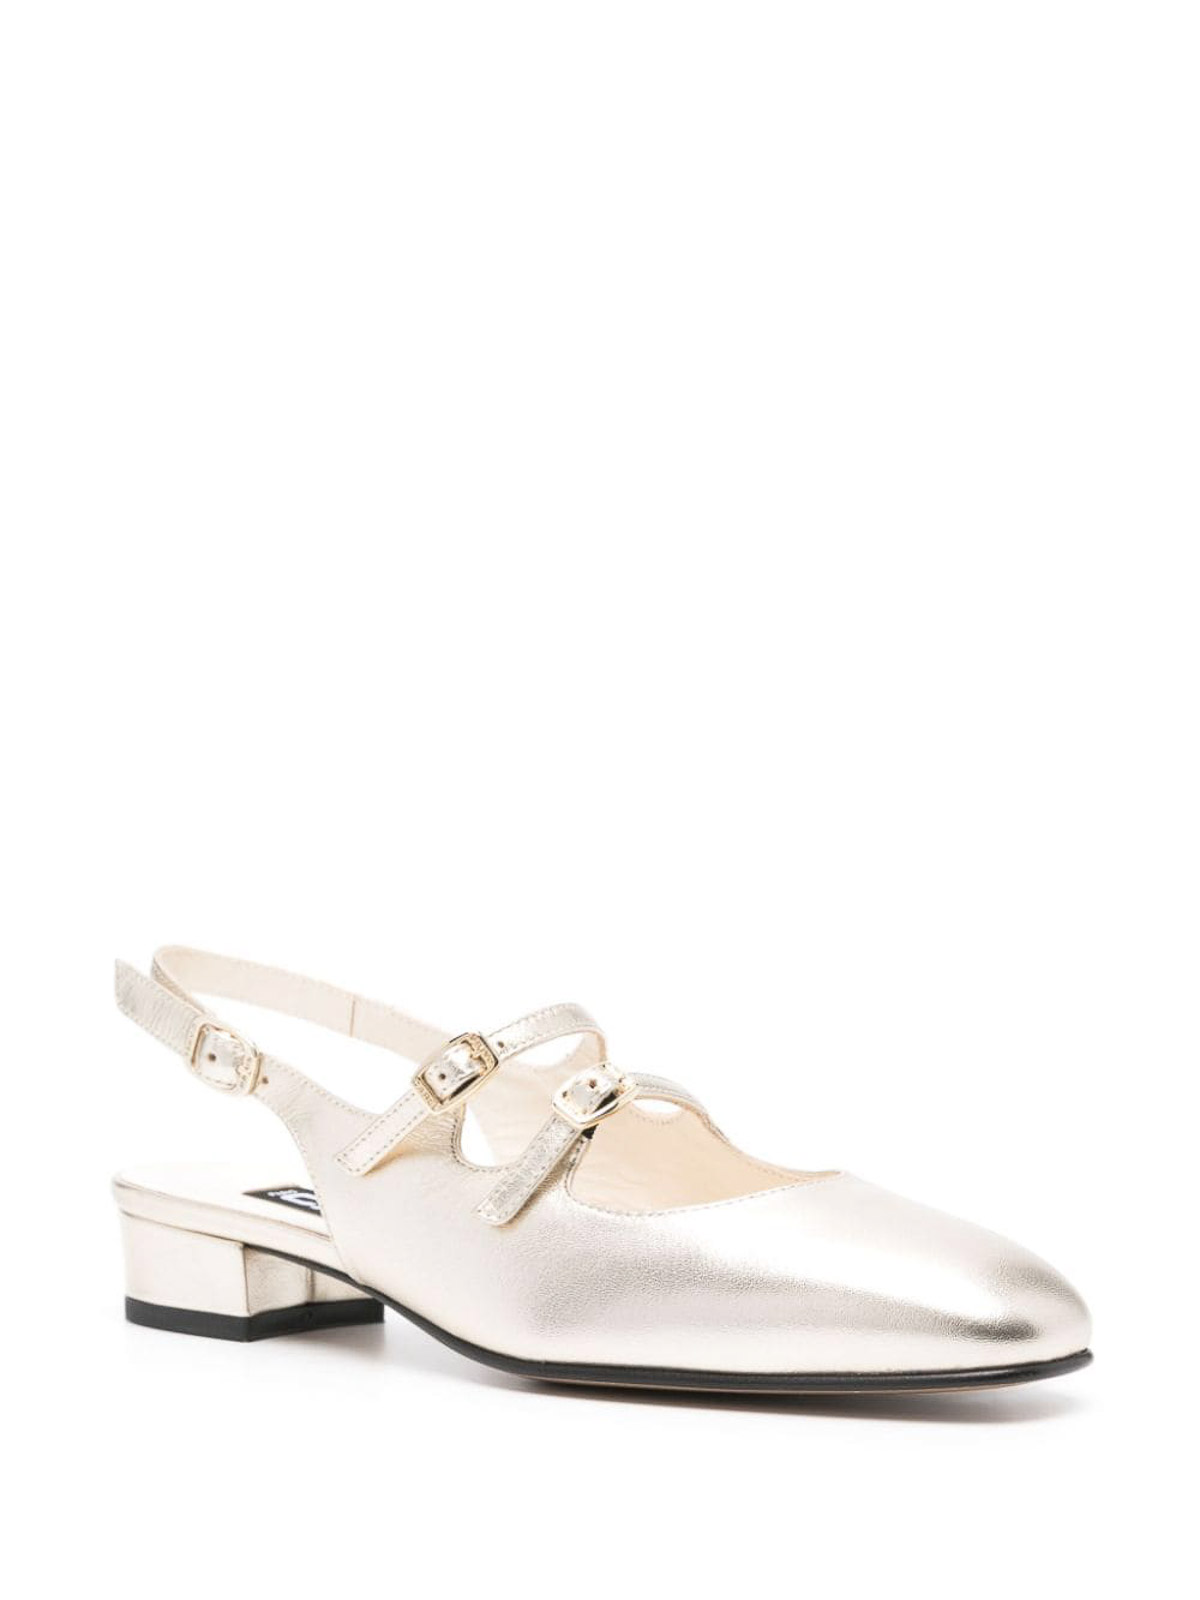 Shop Care Label Slingback Peche Night In Leather In Silver